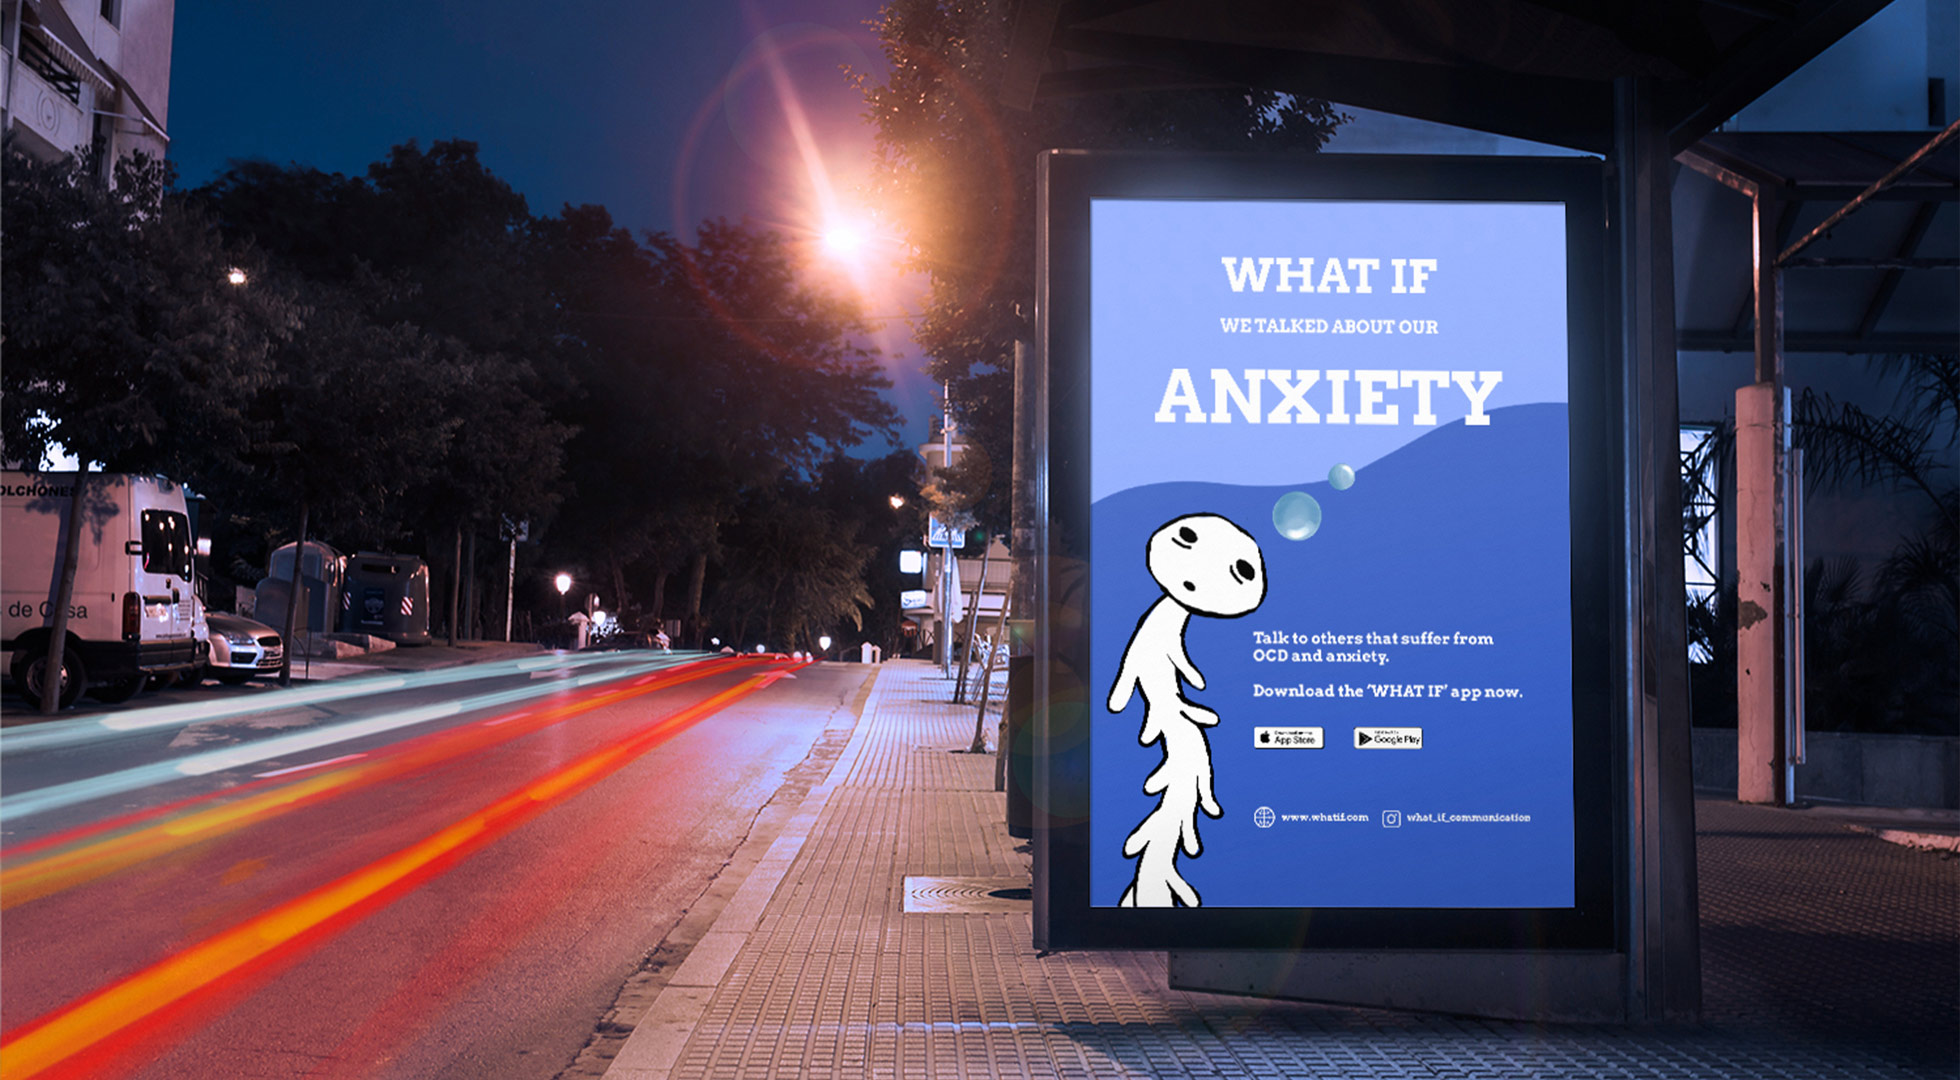 A mock up of an advertisment showing for the What If app at a bus stop